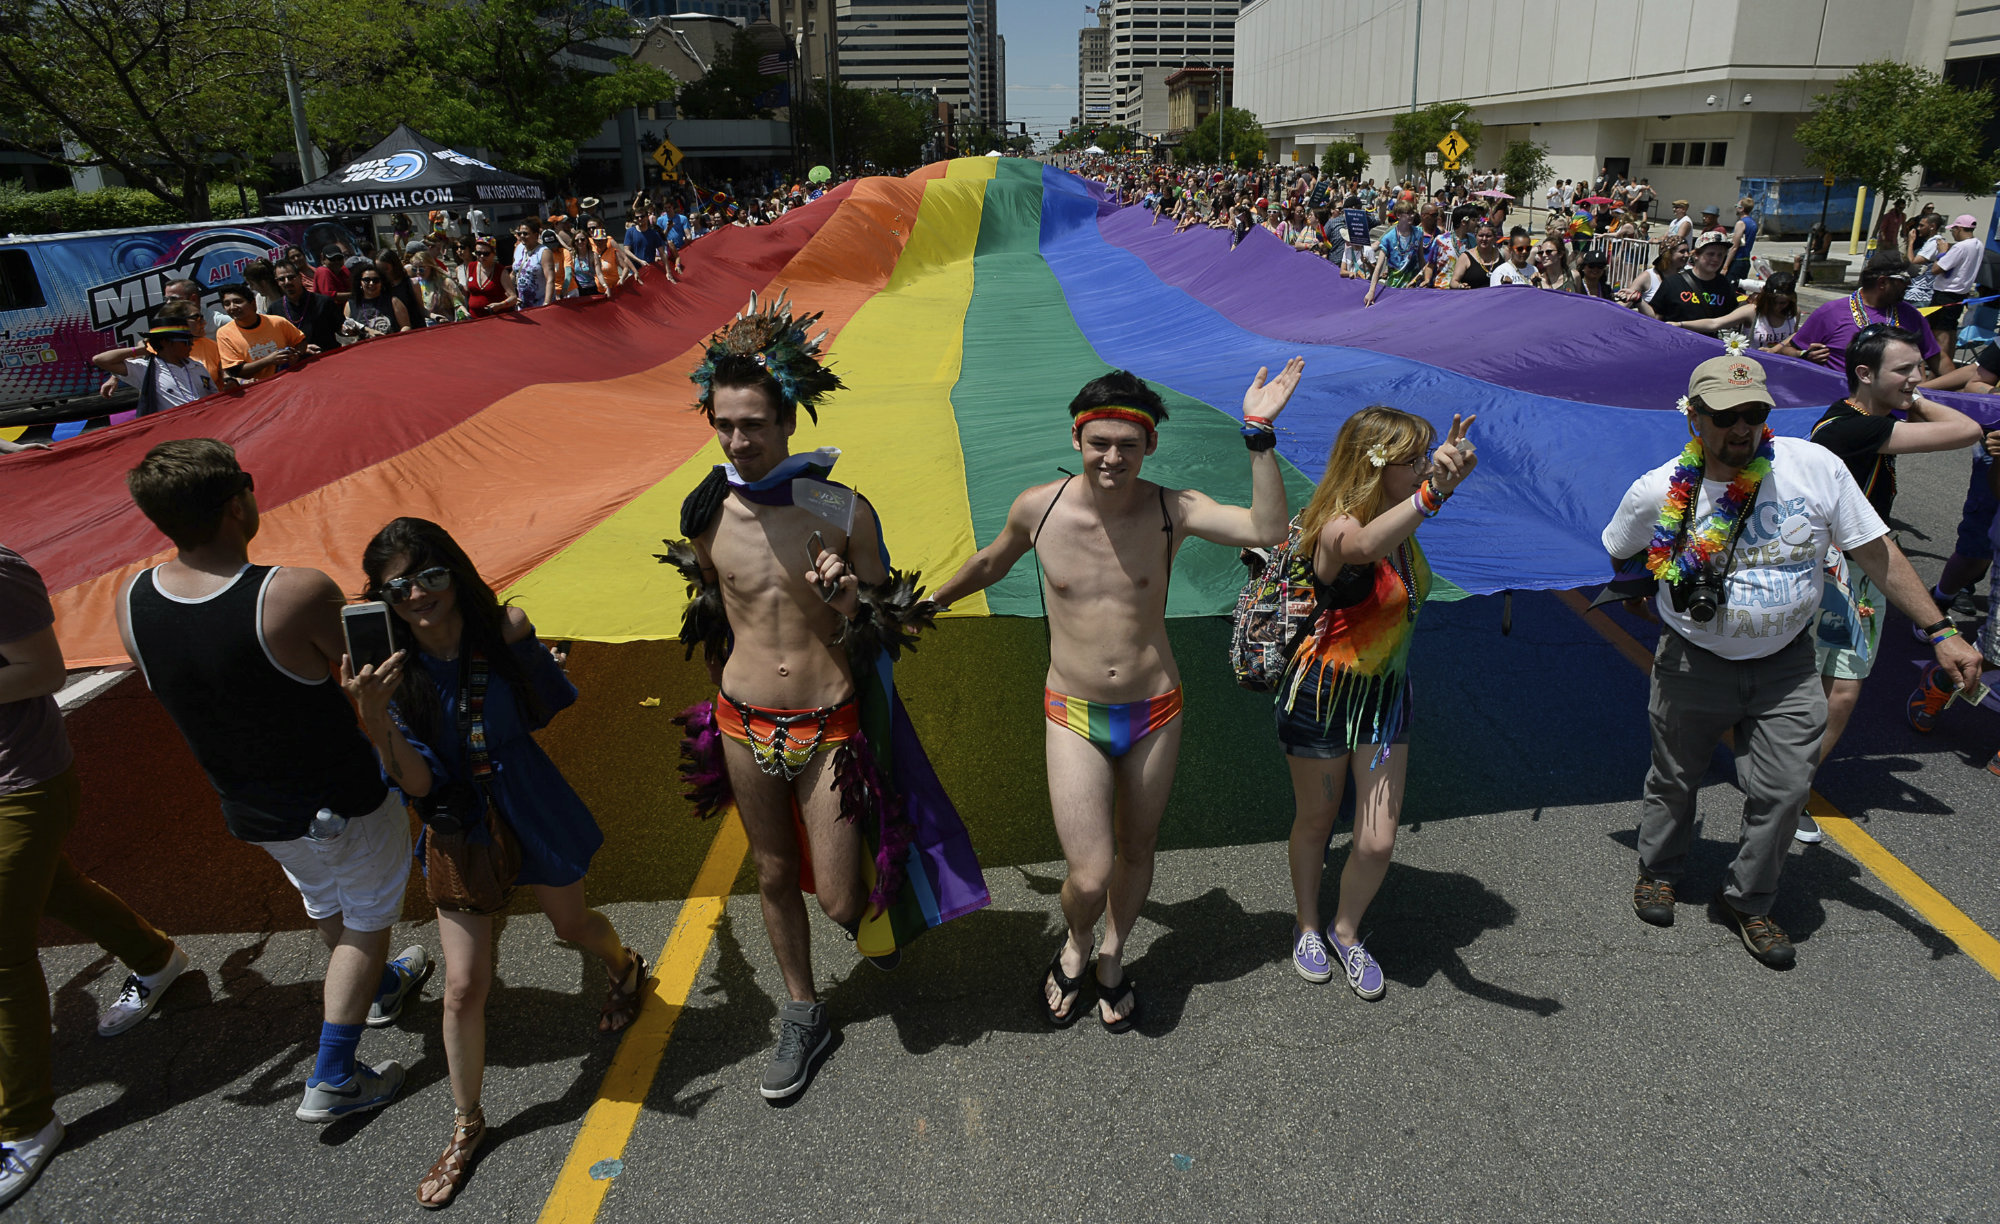 when was first gay pride parade in columbus ohio